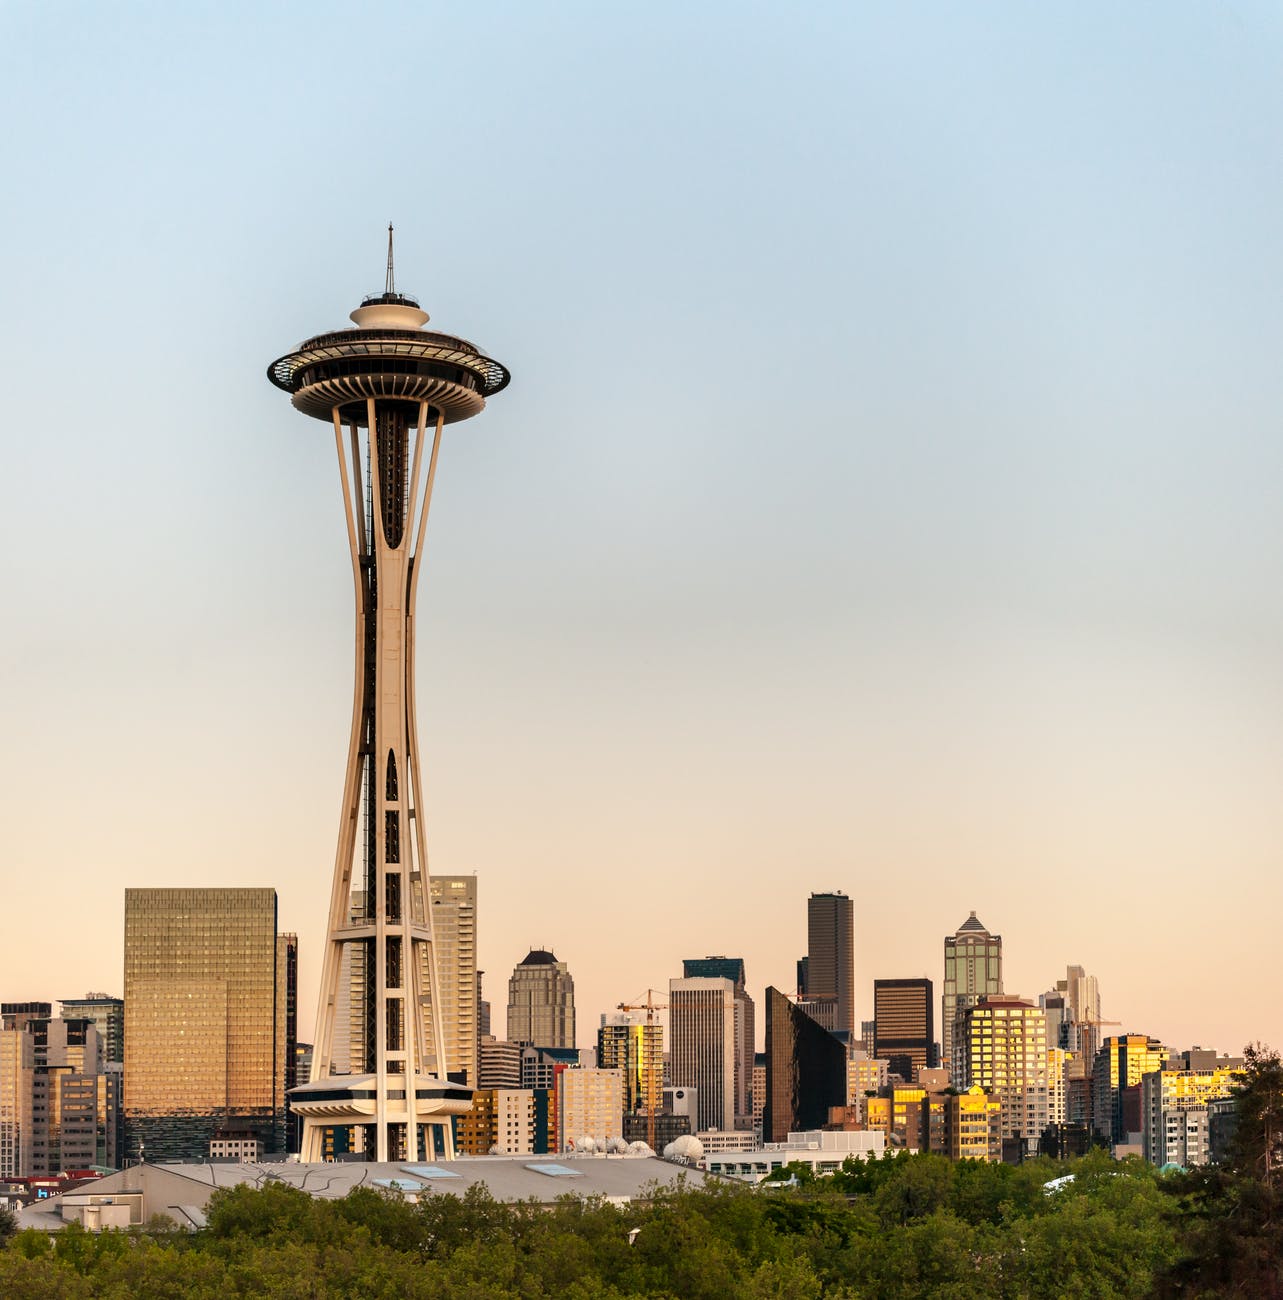 cityscape photo of the space needle observation tower in seattle washington